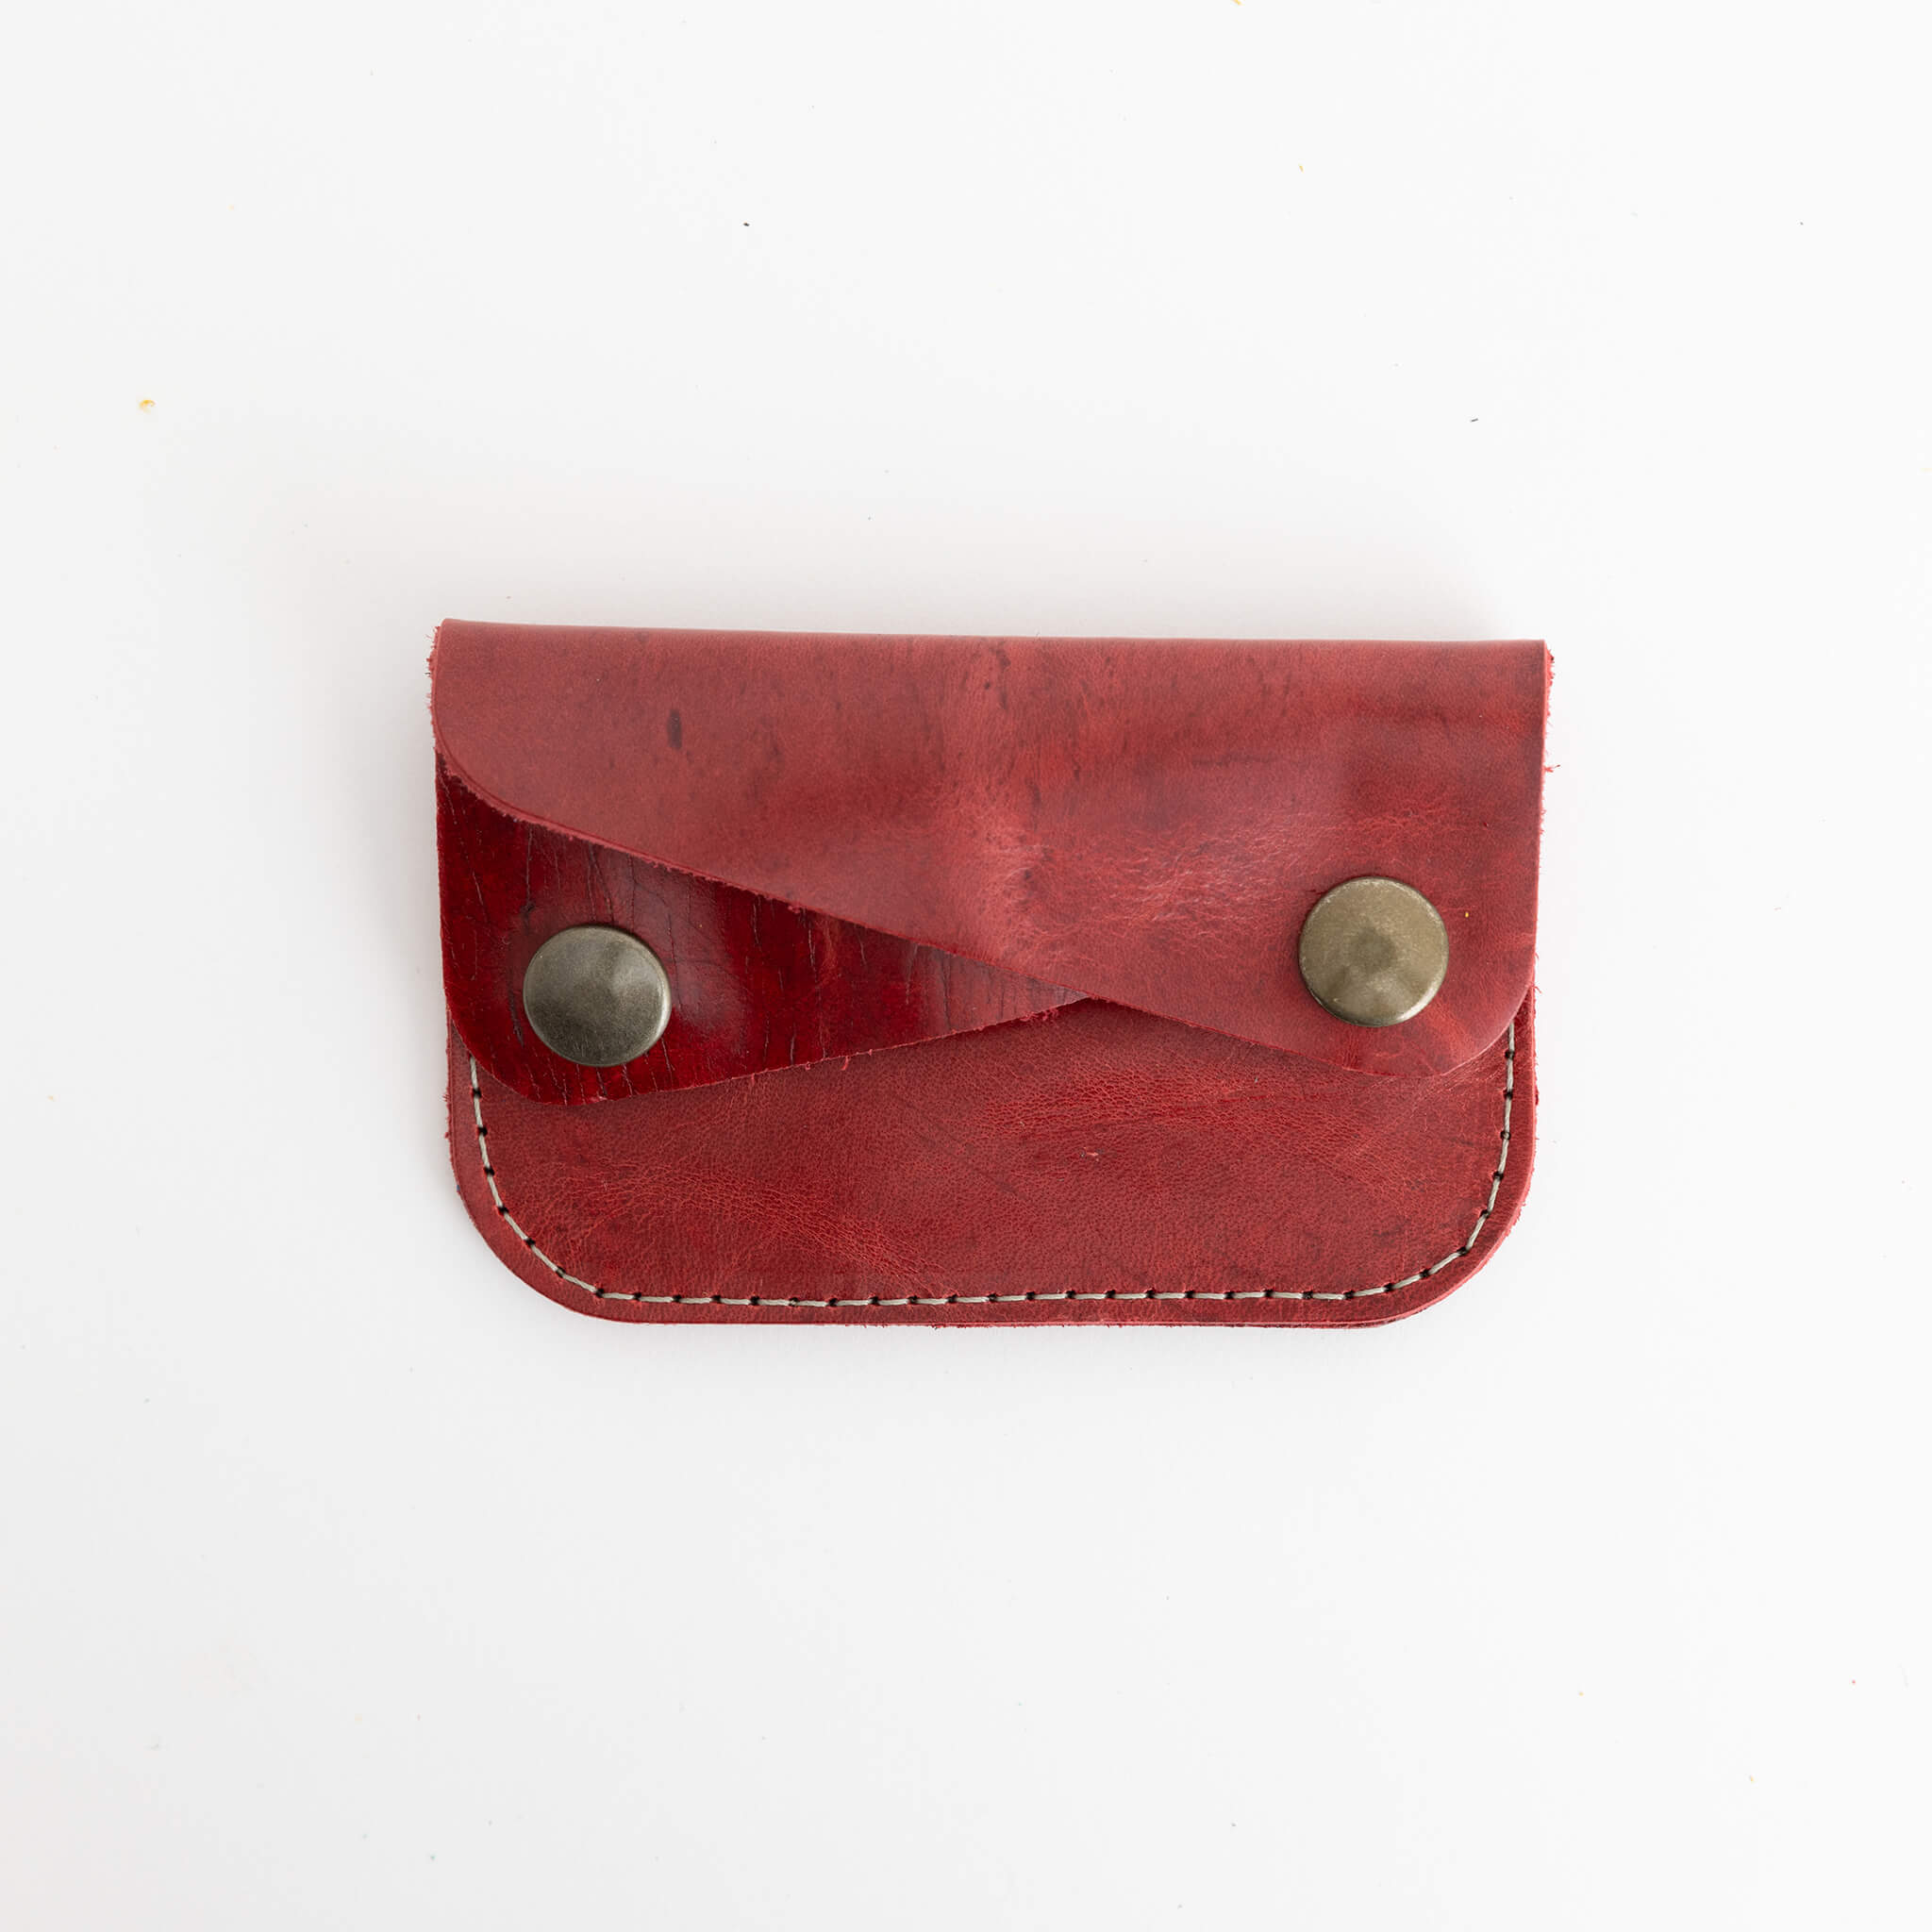 river card wallet - unisex double snap - handmade leather - cardinal front view